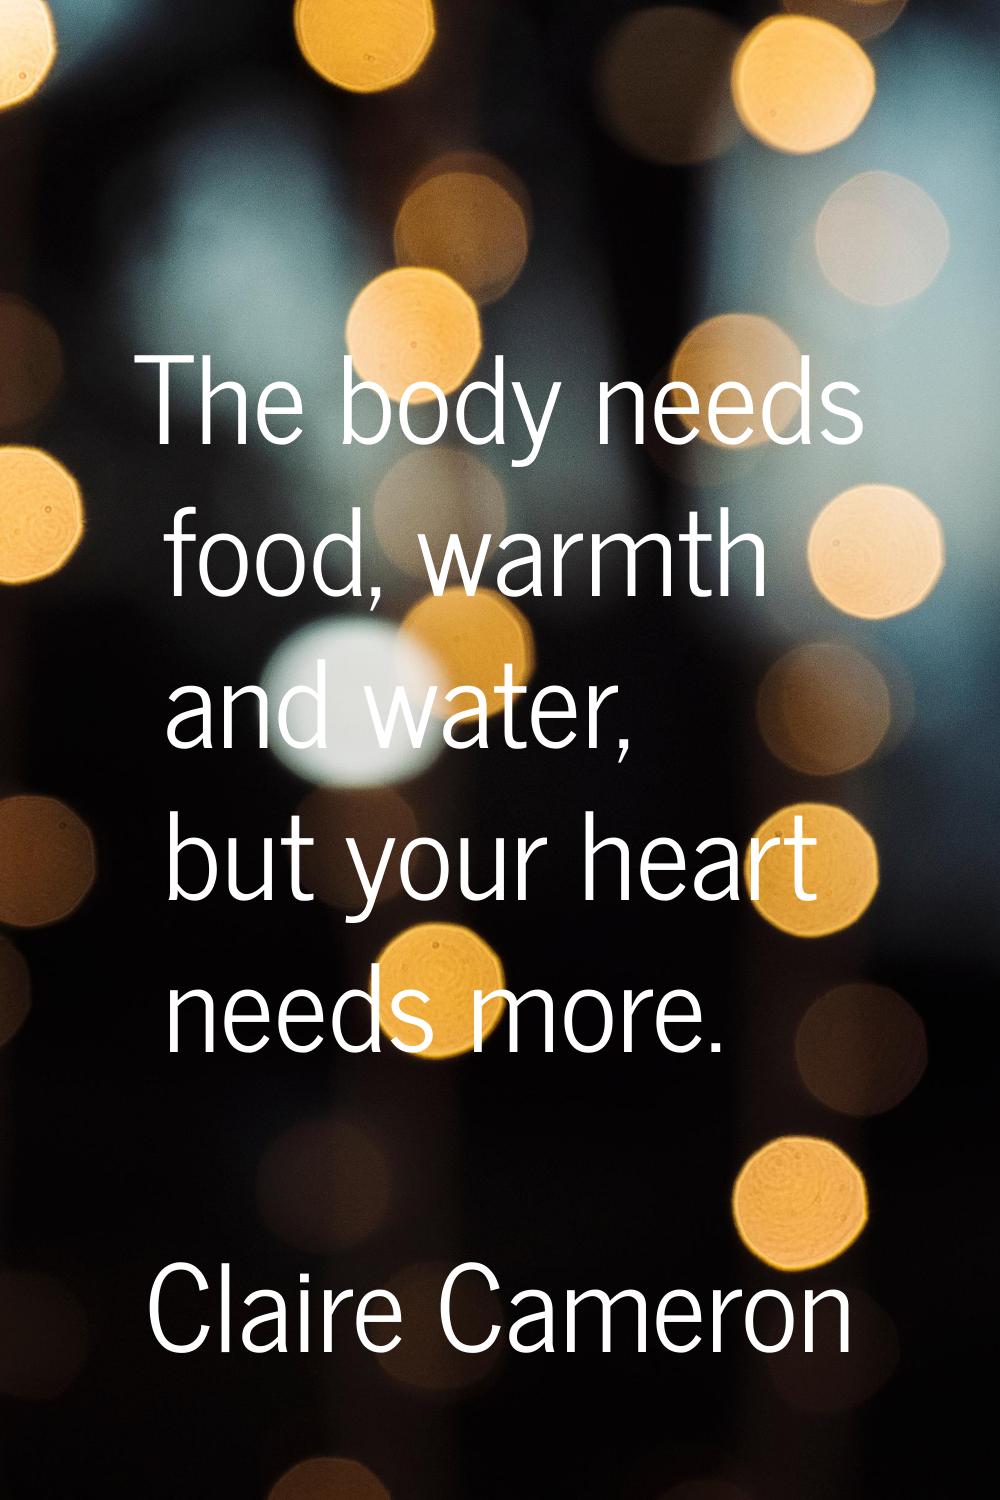 The body needs food, warmth and water, but your heart needs more.